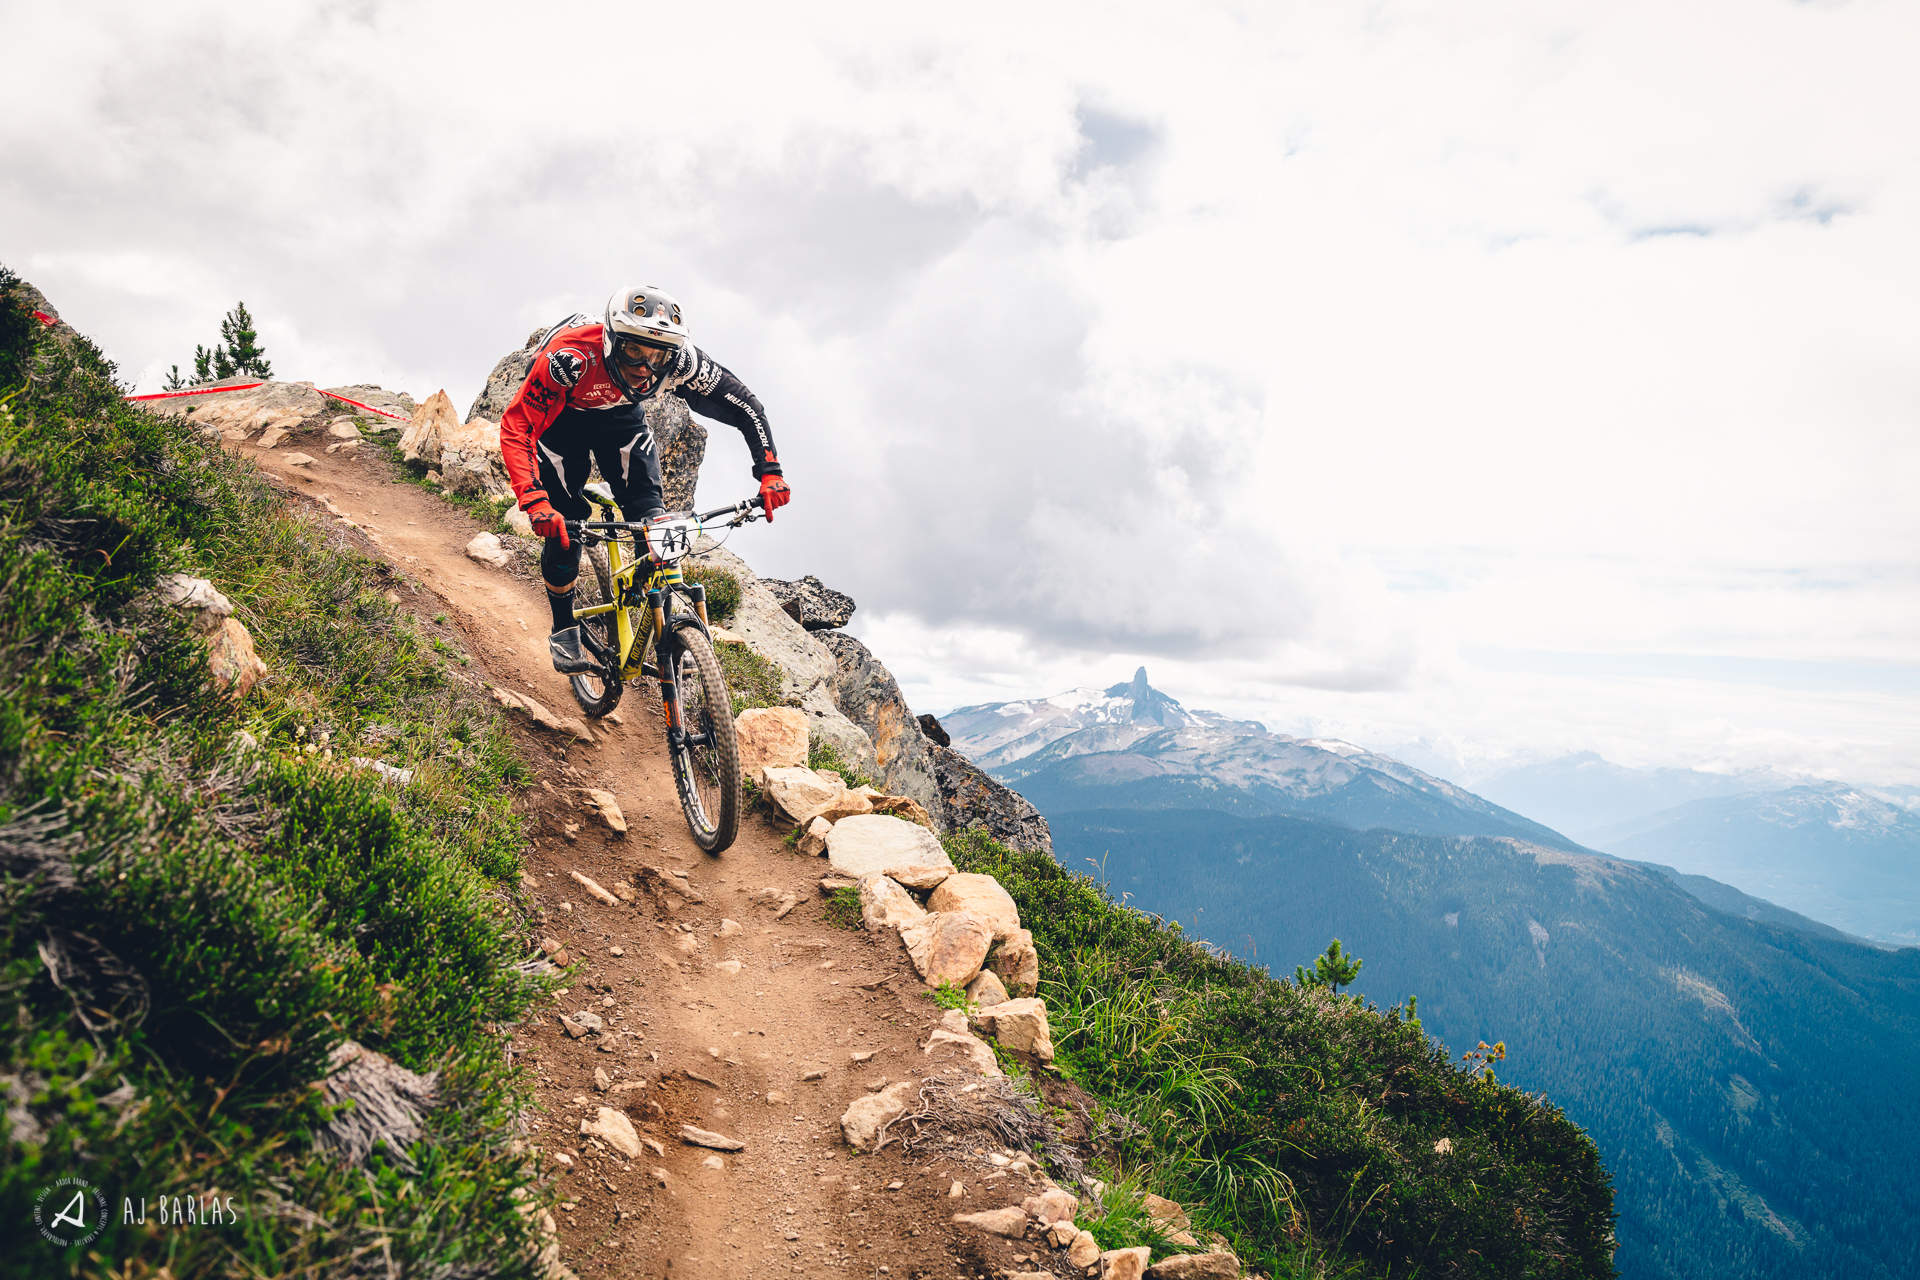 Jordan Hodder and one of the most iconic backdrops of Whistler